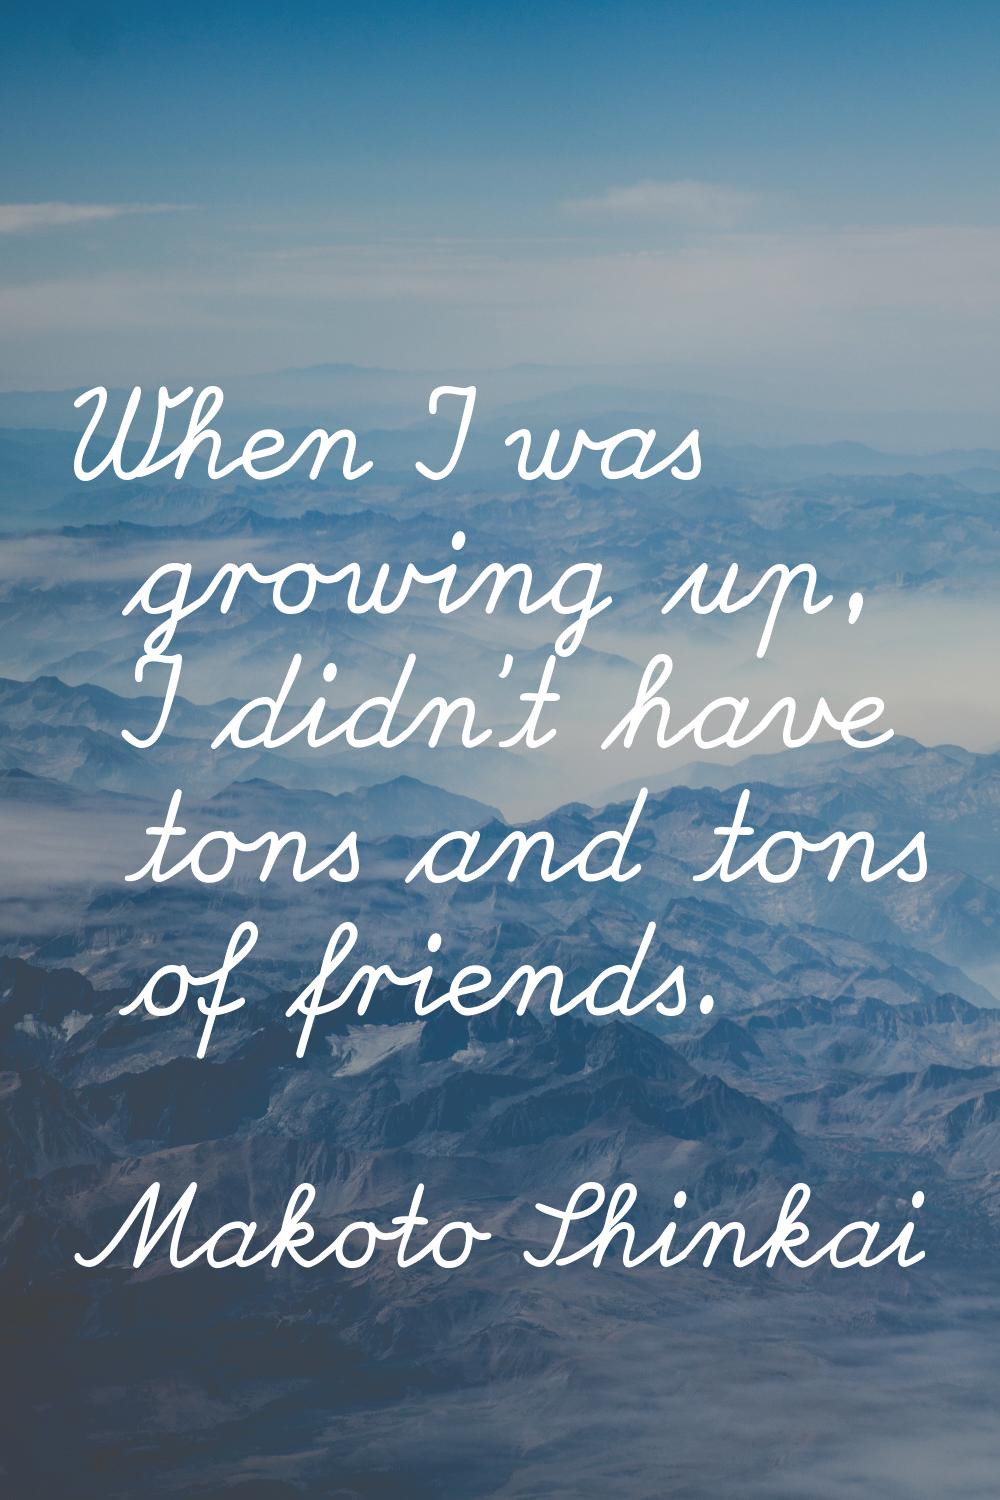 When I was growing up, I didn't have tons and tons of friends.